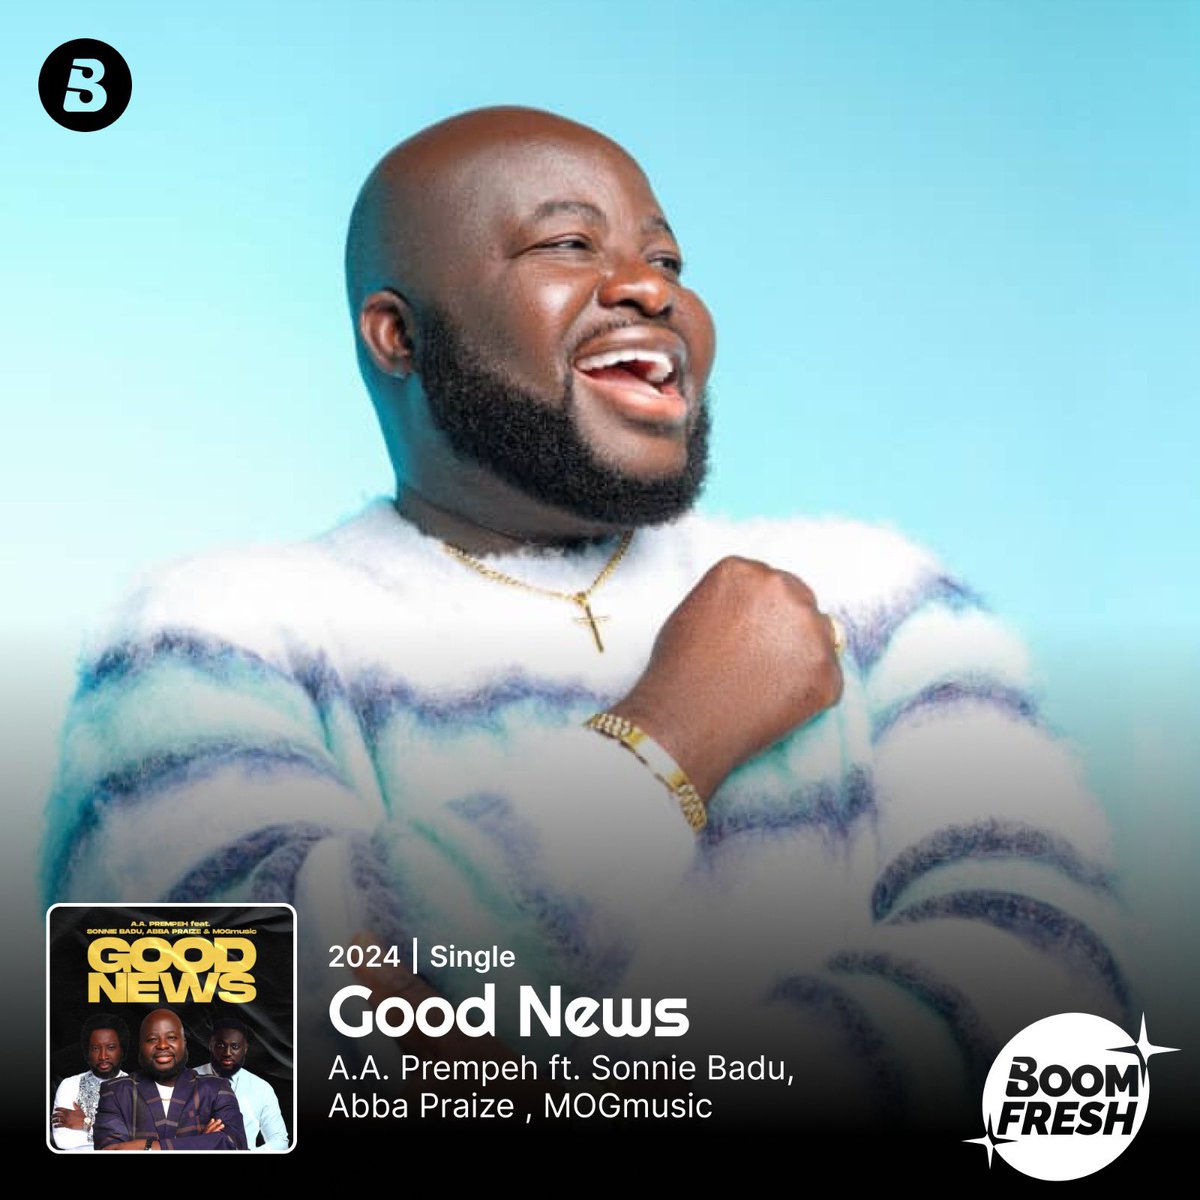 💥BOOMFRESH💥 💃🏽Dance to #GoodNews by @prophet_prempeh featuring @SonnieBaduuk, @MOGmusic_ and @Abbapraise. Available now on #Boomplay. 🎧: Boom.lnk.to/AAPrempehGoodN… #HomeOfMusic